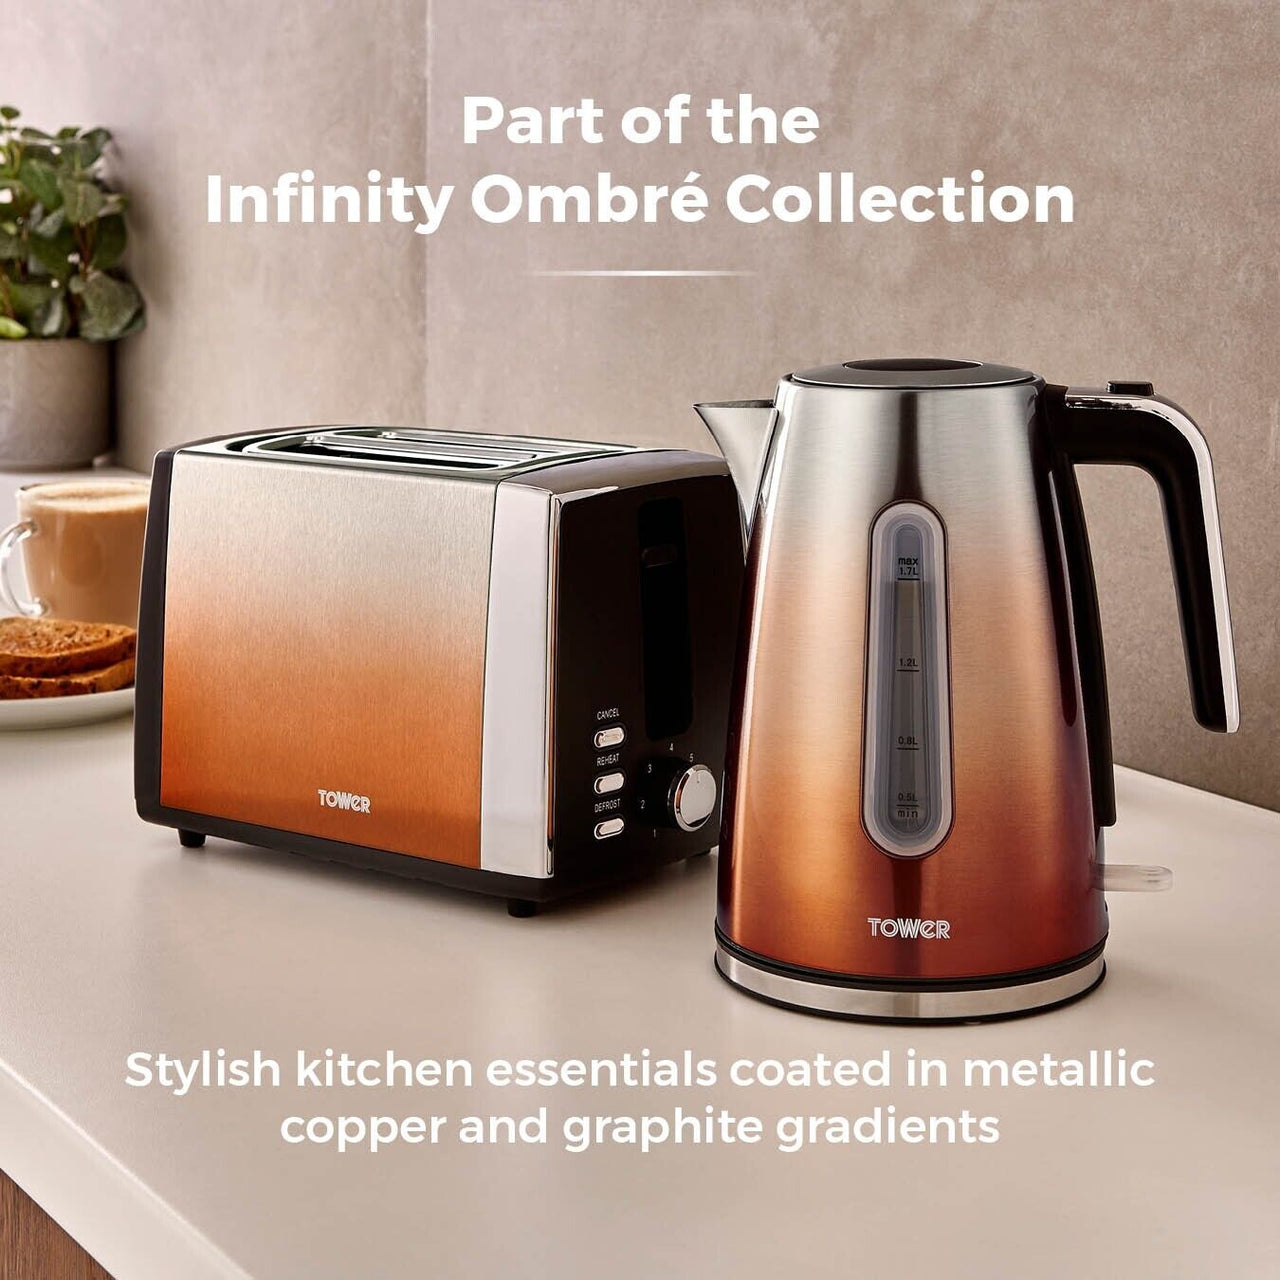 Tower Infinity Ombre Copper Kettle Toaster Canisters Mug Tree & Towel Pole Set